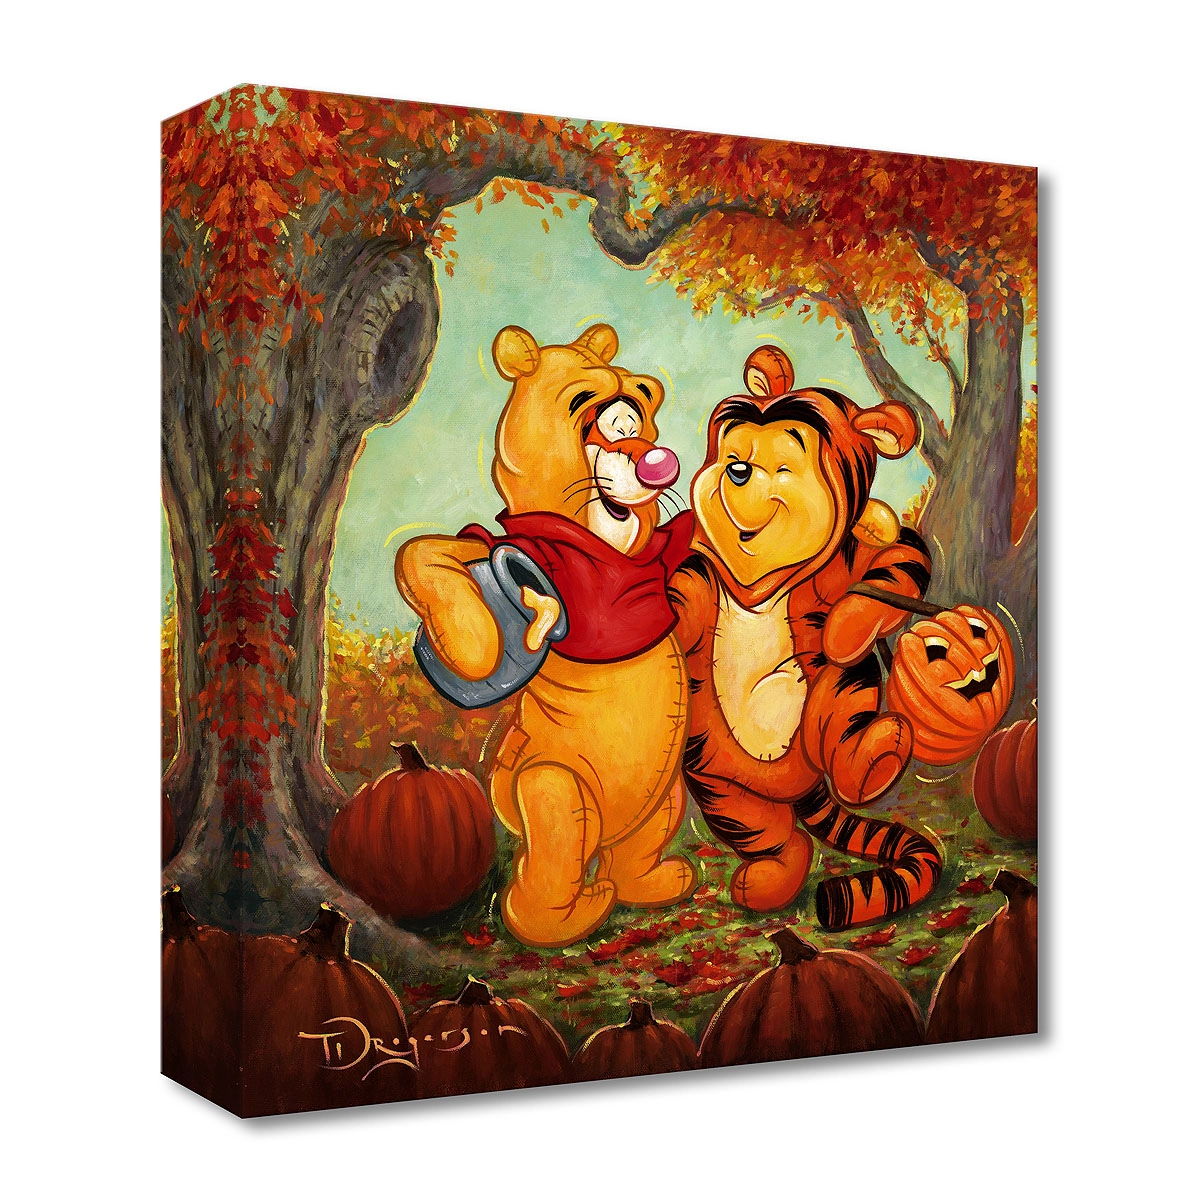 Tim Rogerson Friendship Masquerade From Winnie the Pooh Gallery Wrapped Giclee On Canvas